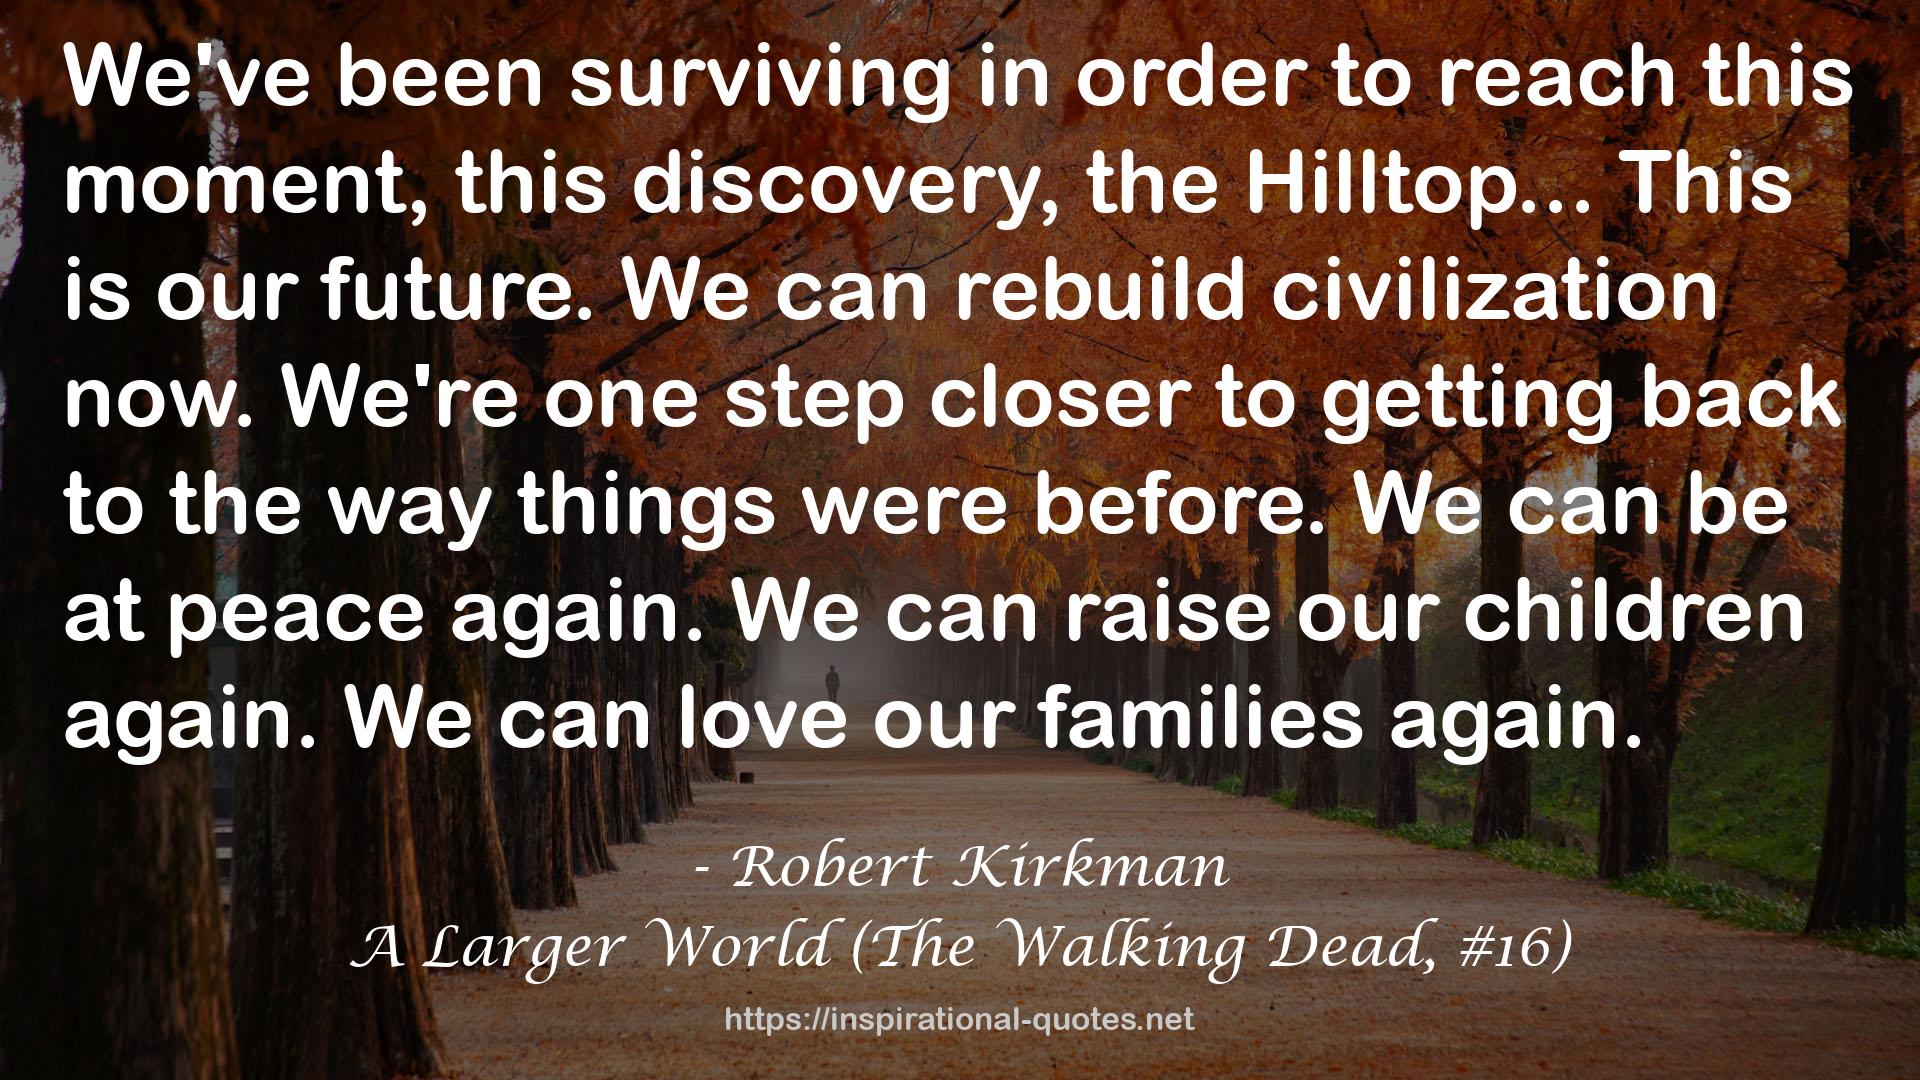 A Larger World (The Walking Dead, #16) QUOTES